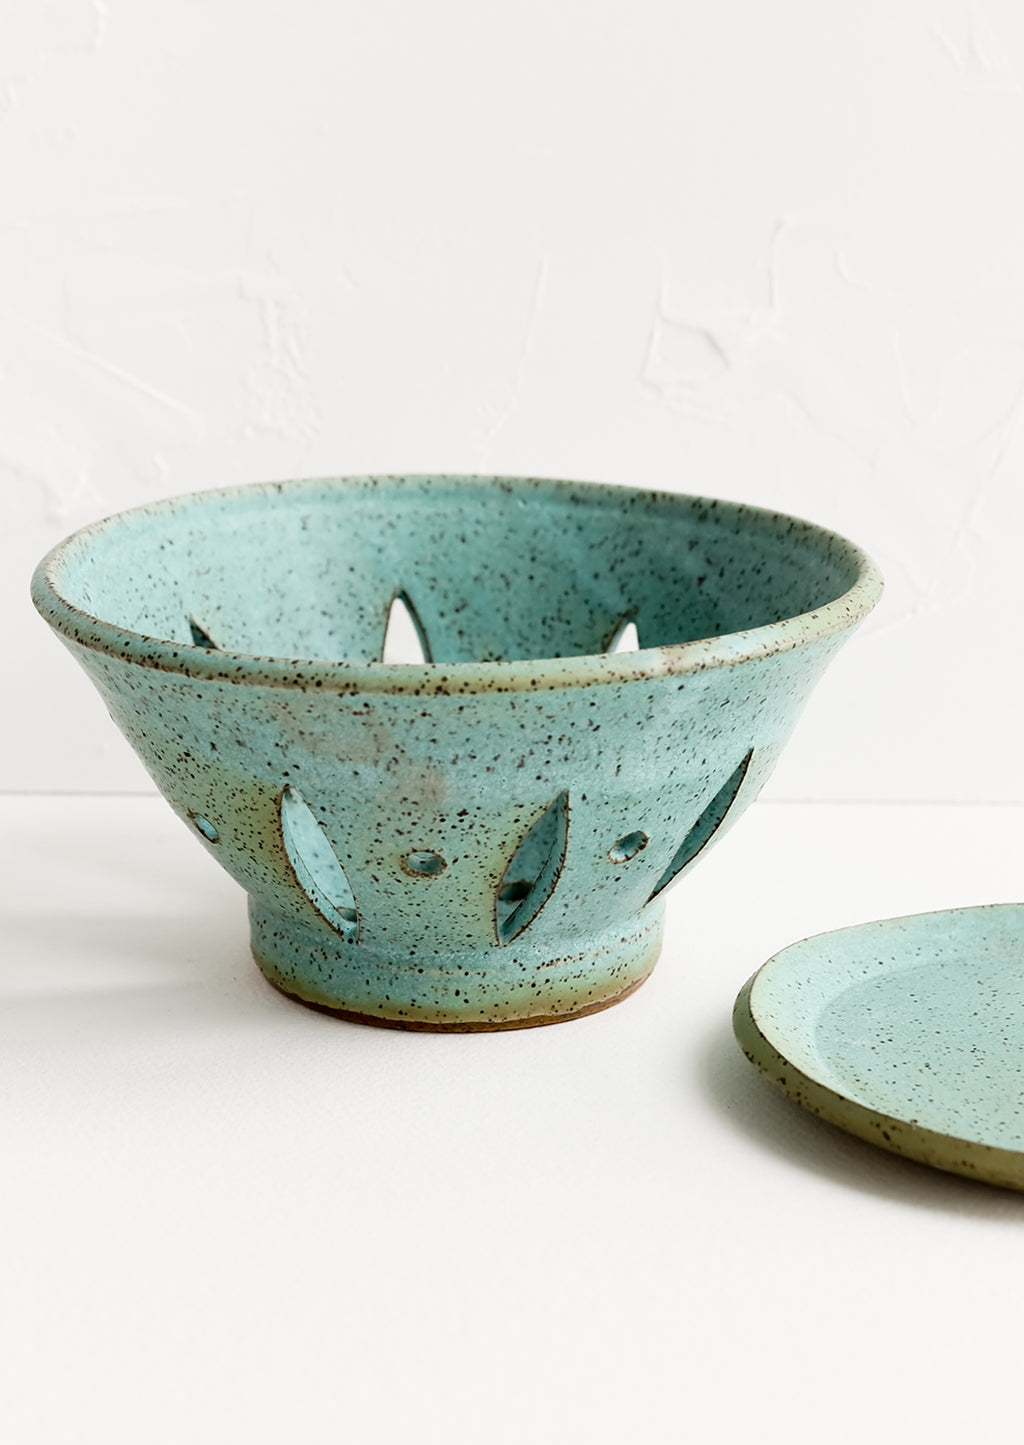 3: A ceramic berry bowl with plate in turquoise.